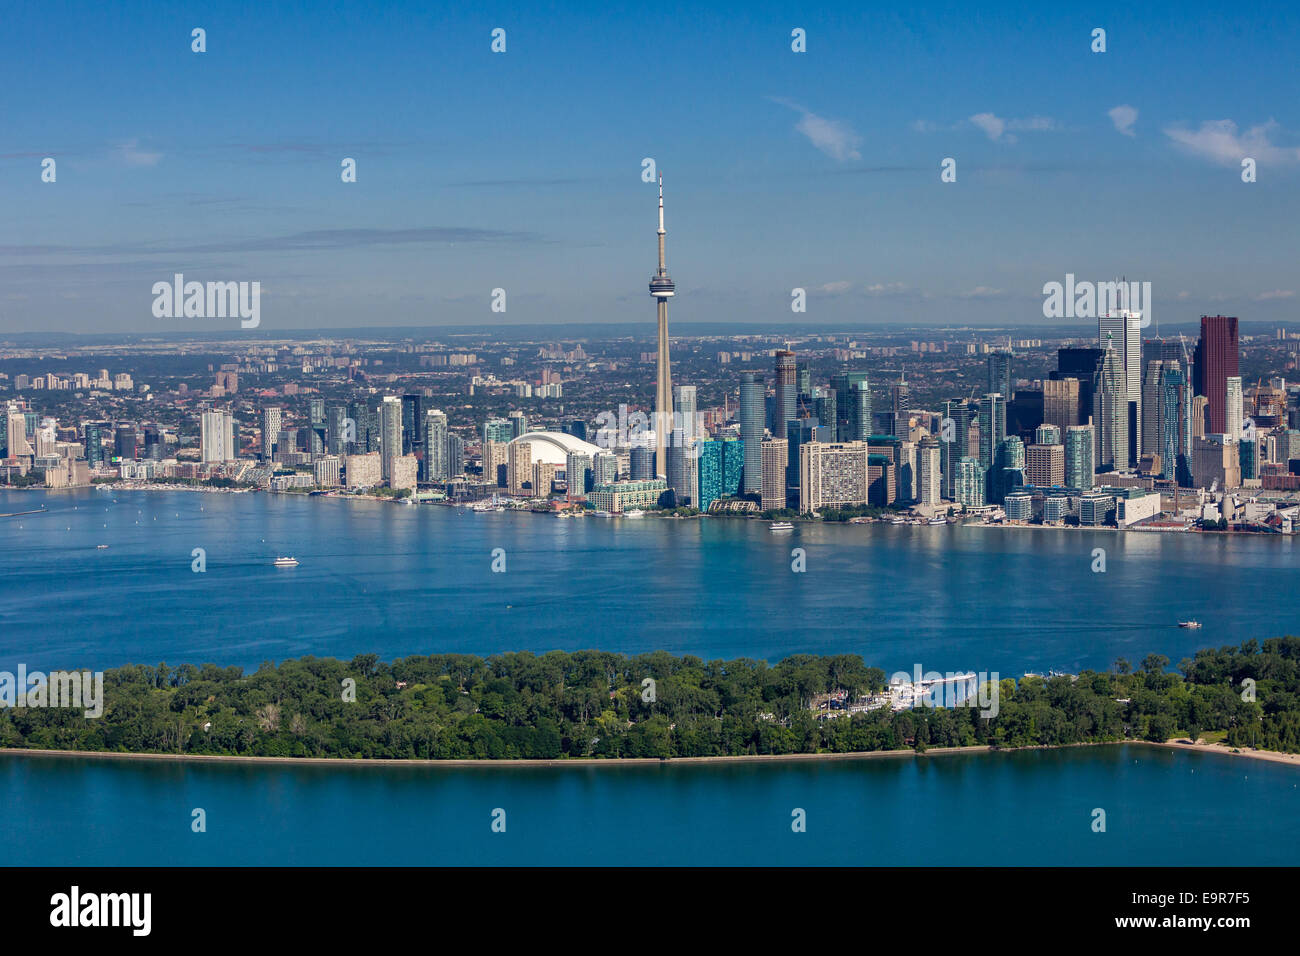 Aerial view of Toronto skyline with Toronto Island in the foreground. Stock Photo